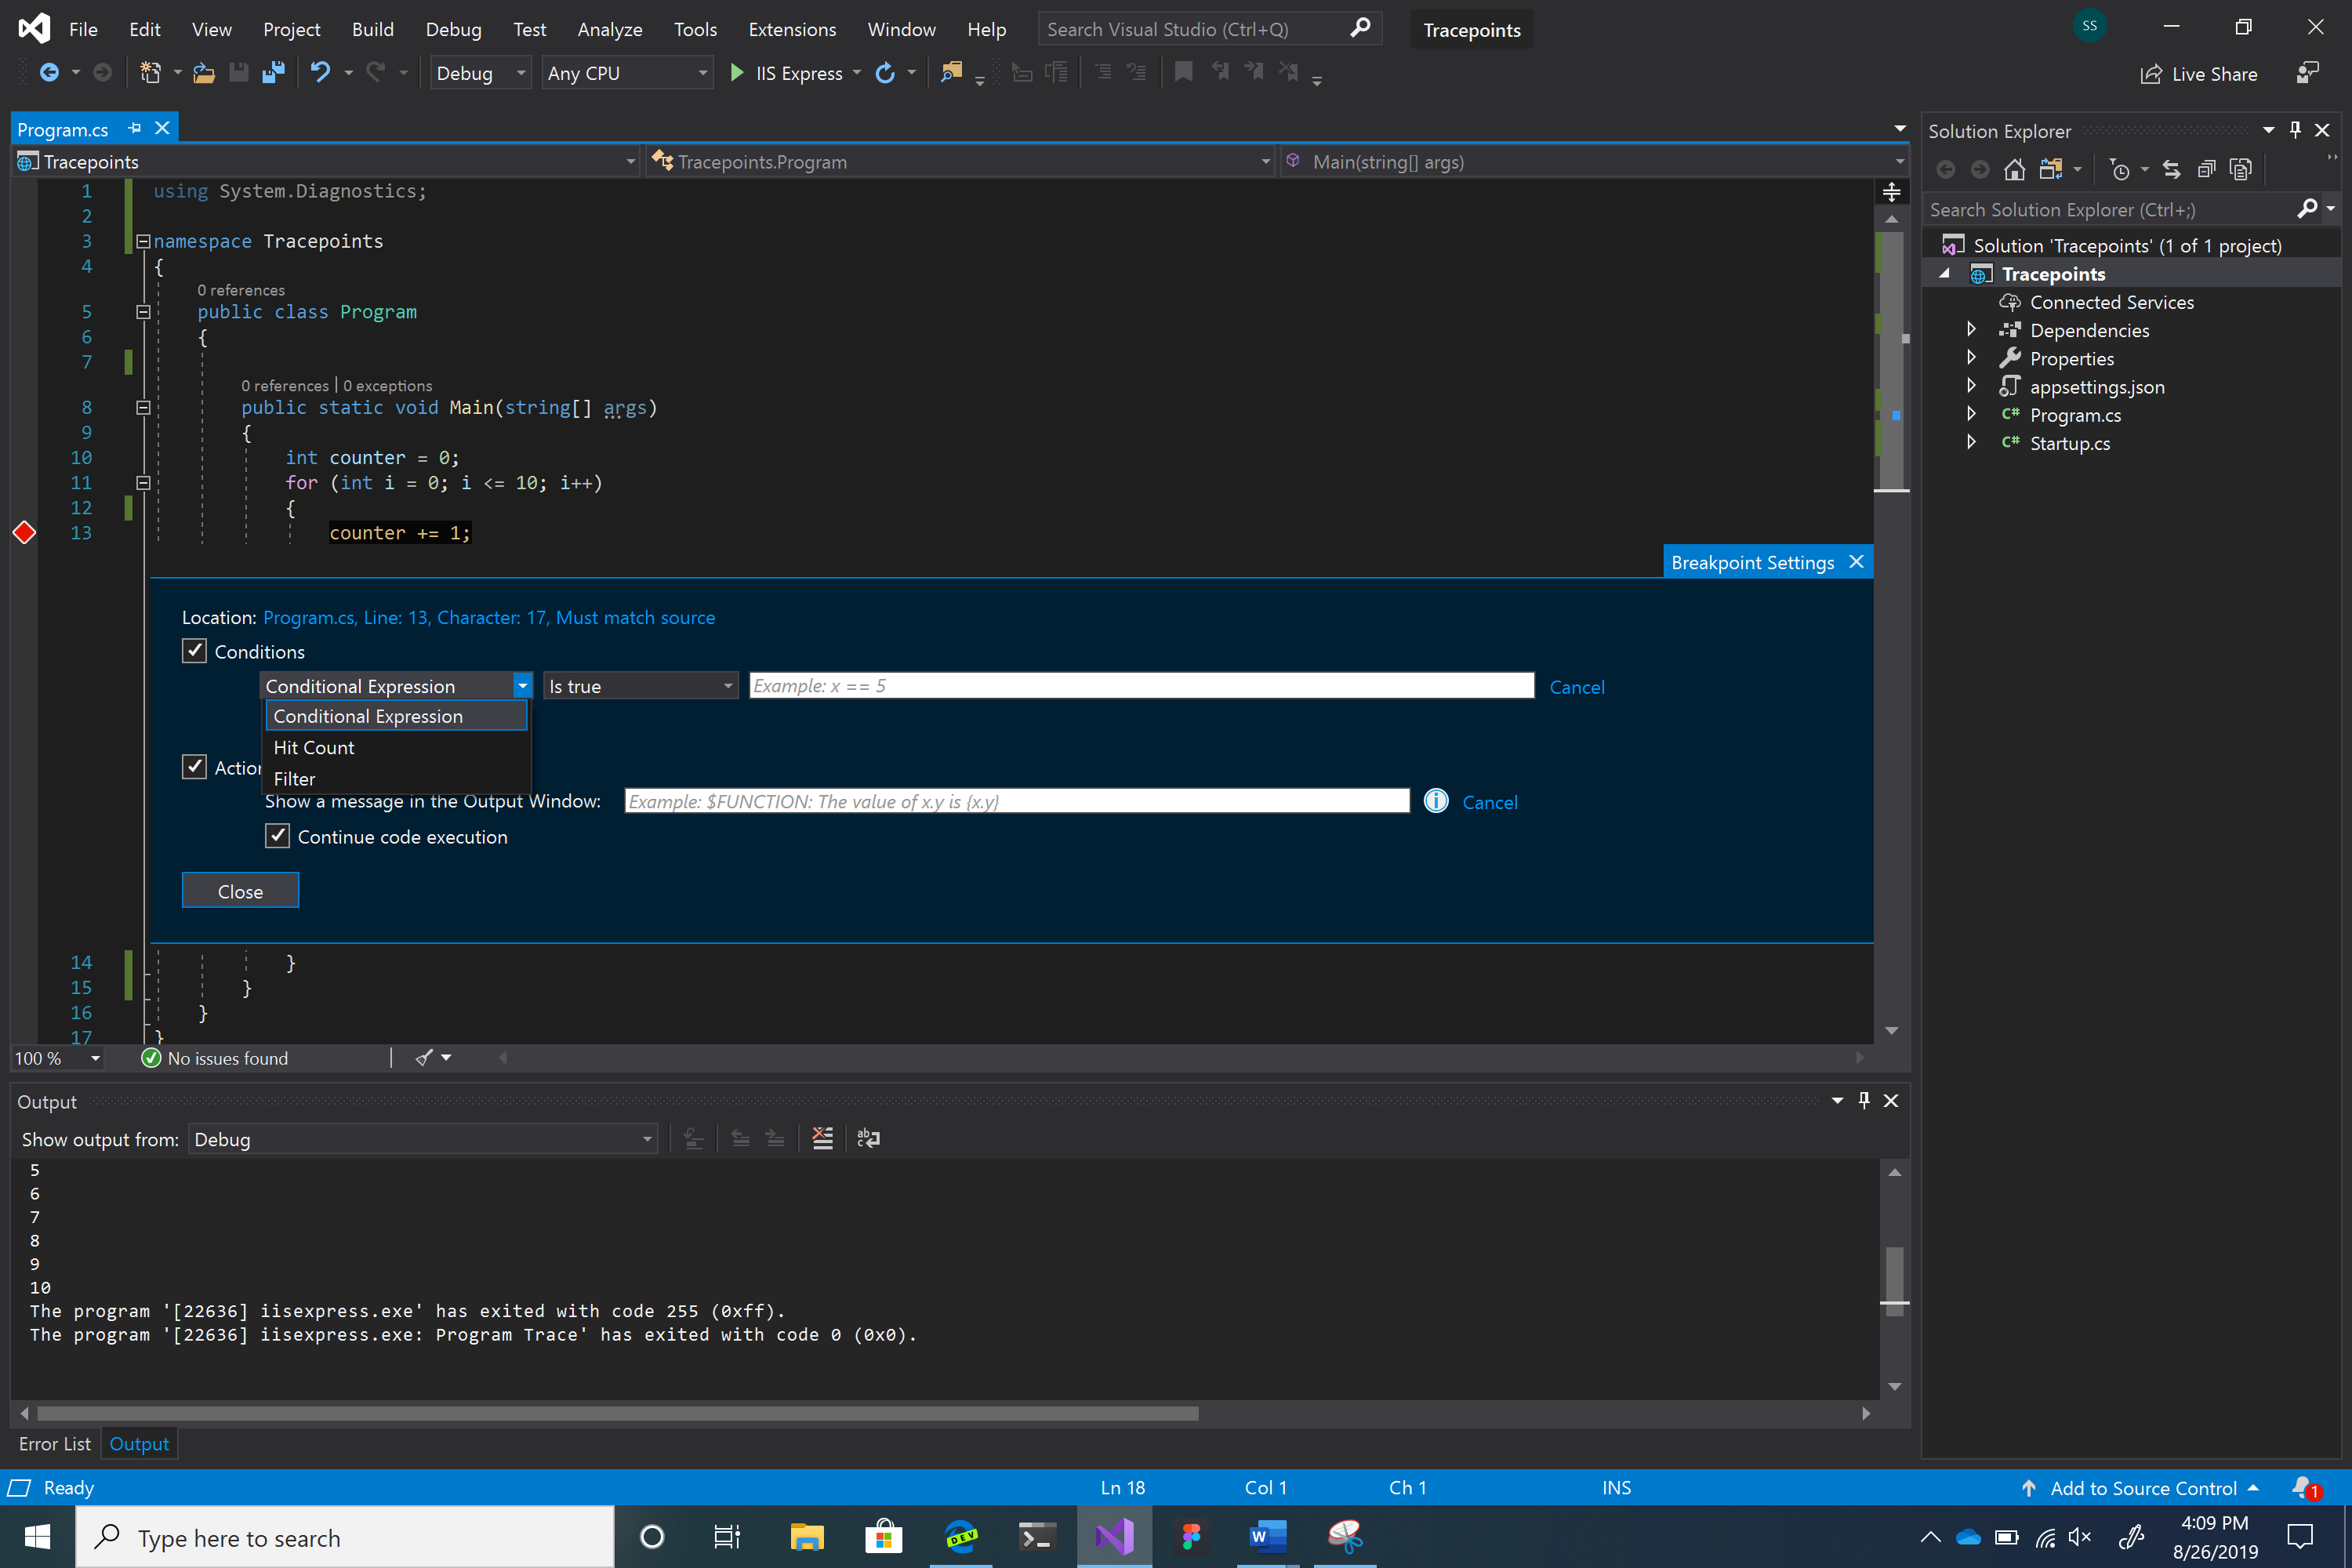 Screenshot of breakpoint window with Conditions Box checked.